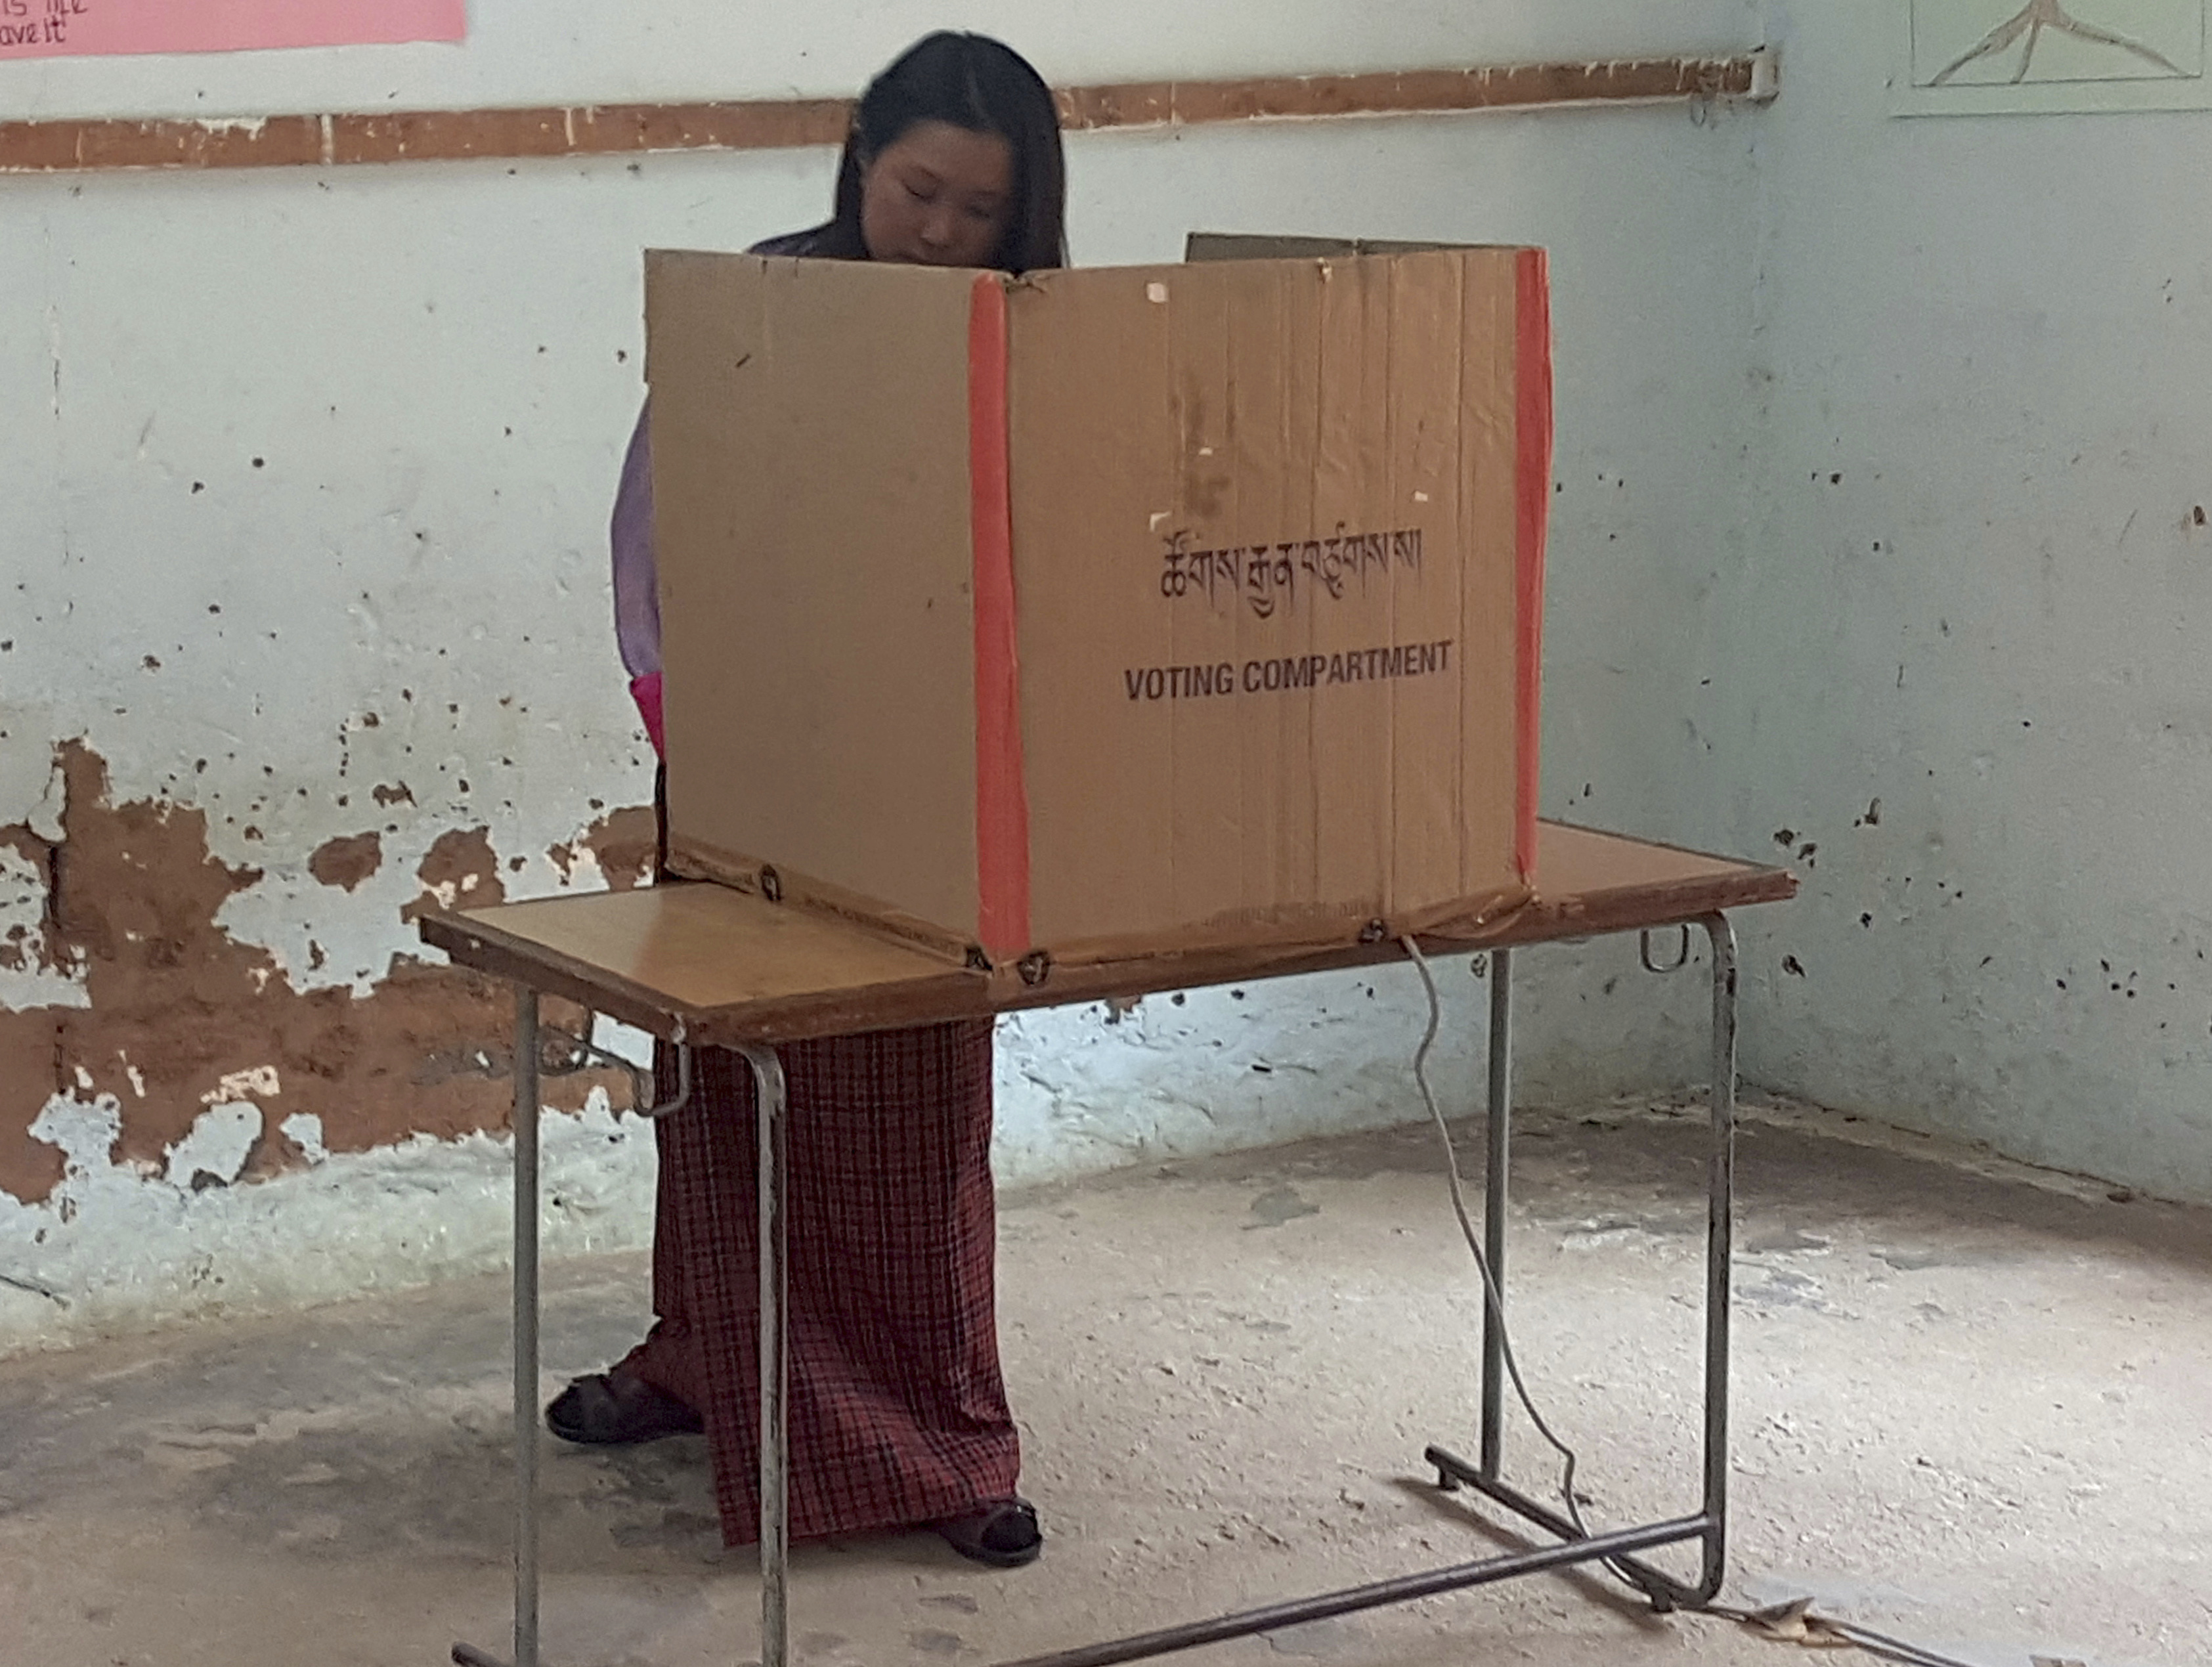 A woman votes in a polling station in Bhutan's capital Thimphu for the parliamentary elections in October 2018, when the small Himalayan kingdom held its third election since the elimination of the absolute monarchy